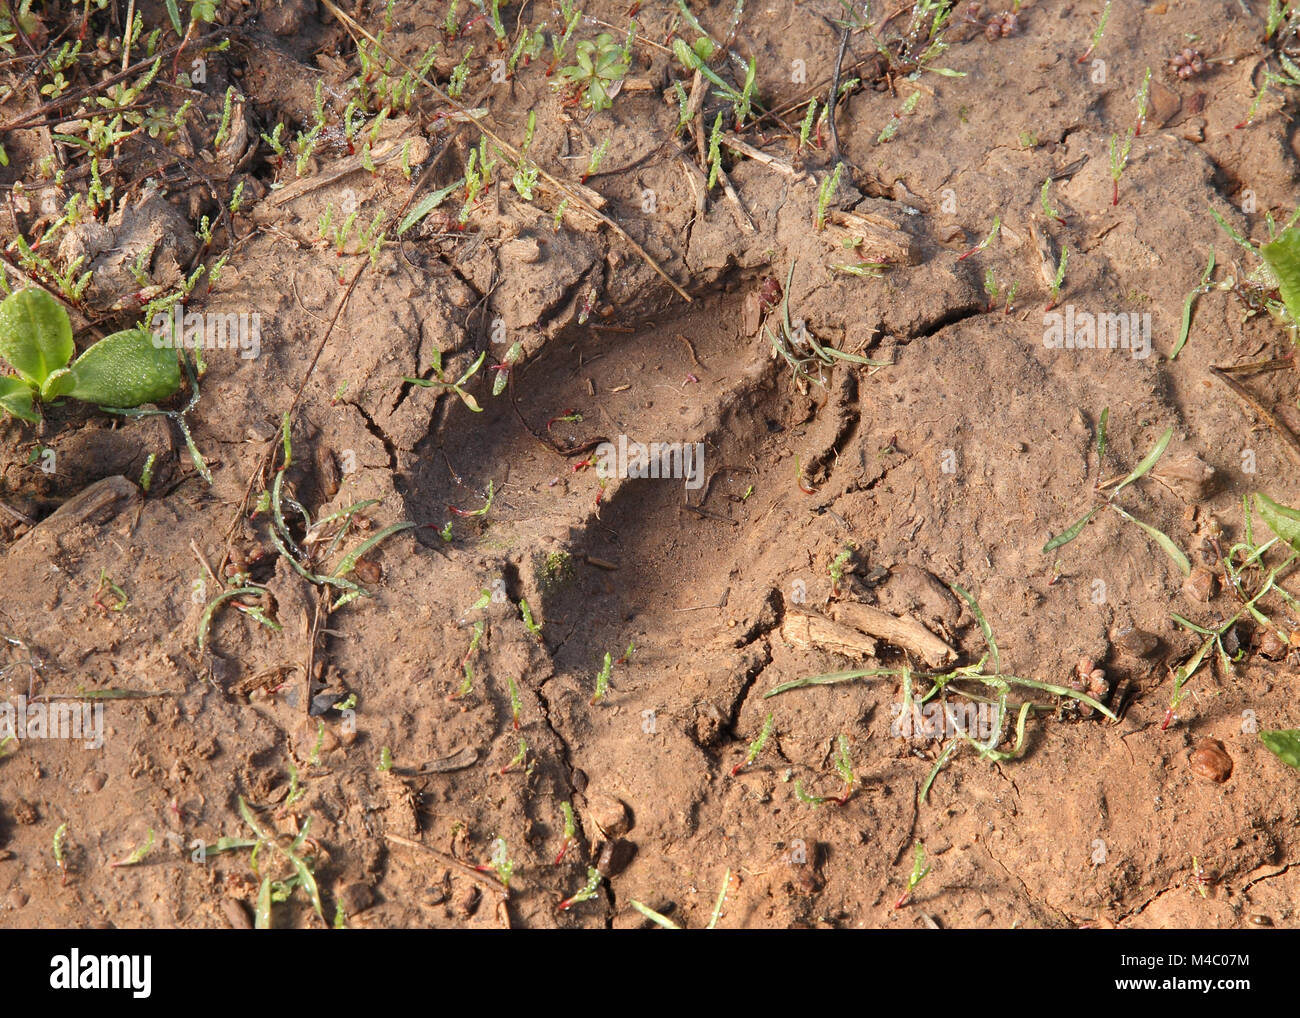 Deer Hoof High Resolution Stock Photography and Images - Alamy